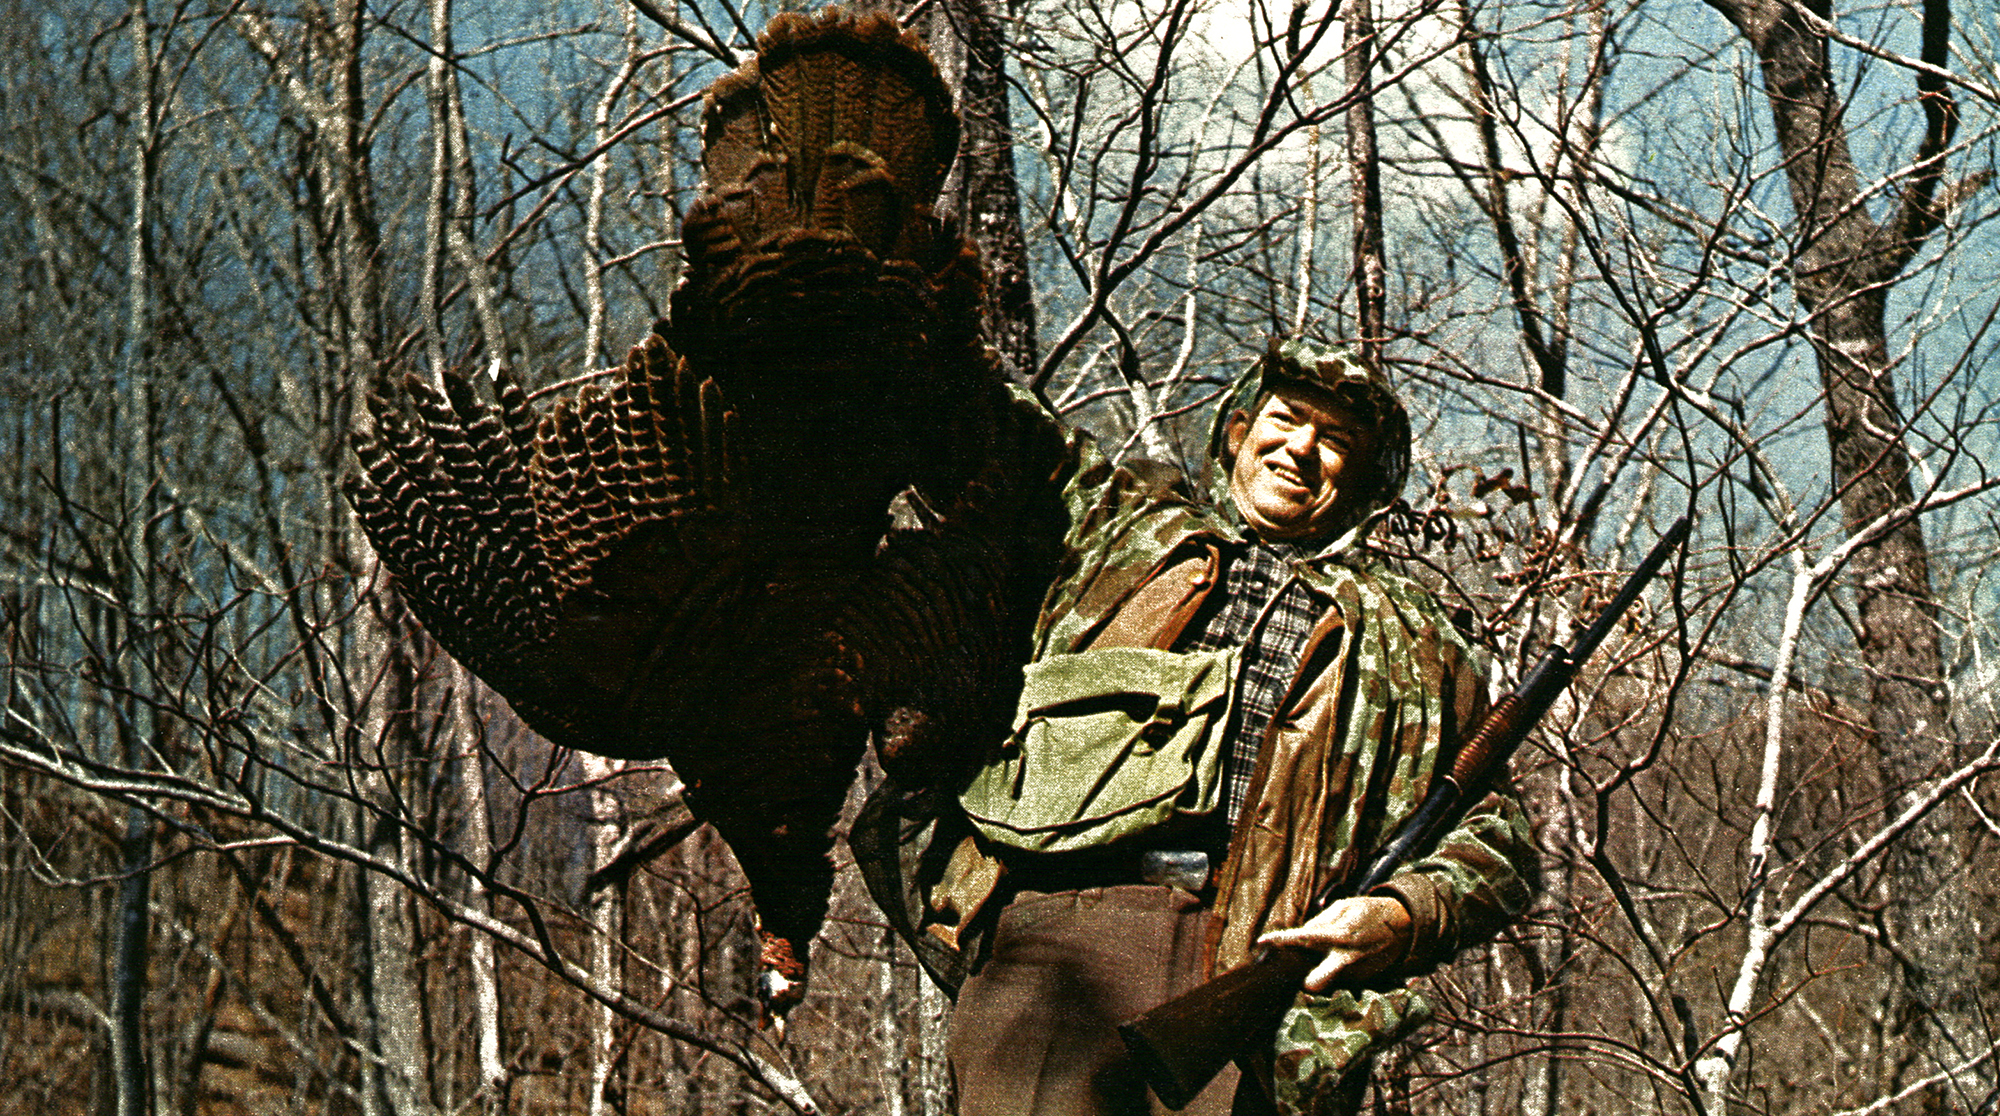 Hunting a Legendary Gobbler, From the Archives